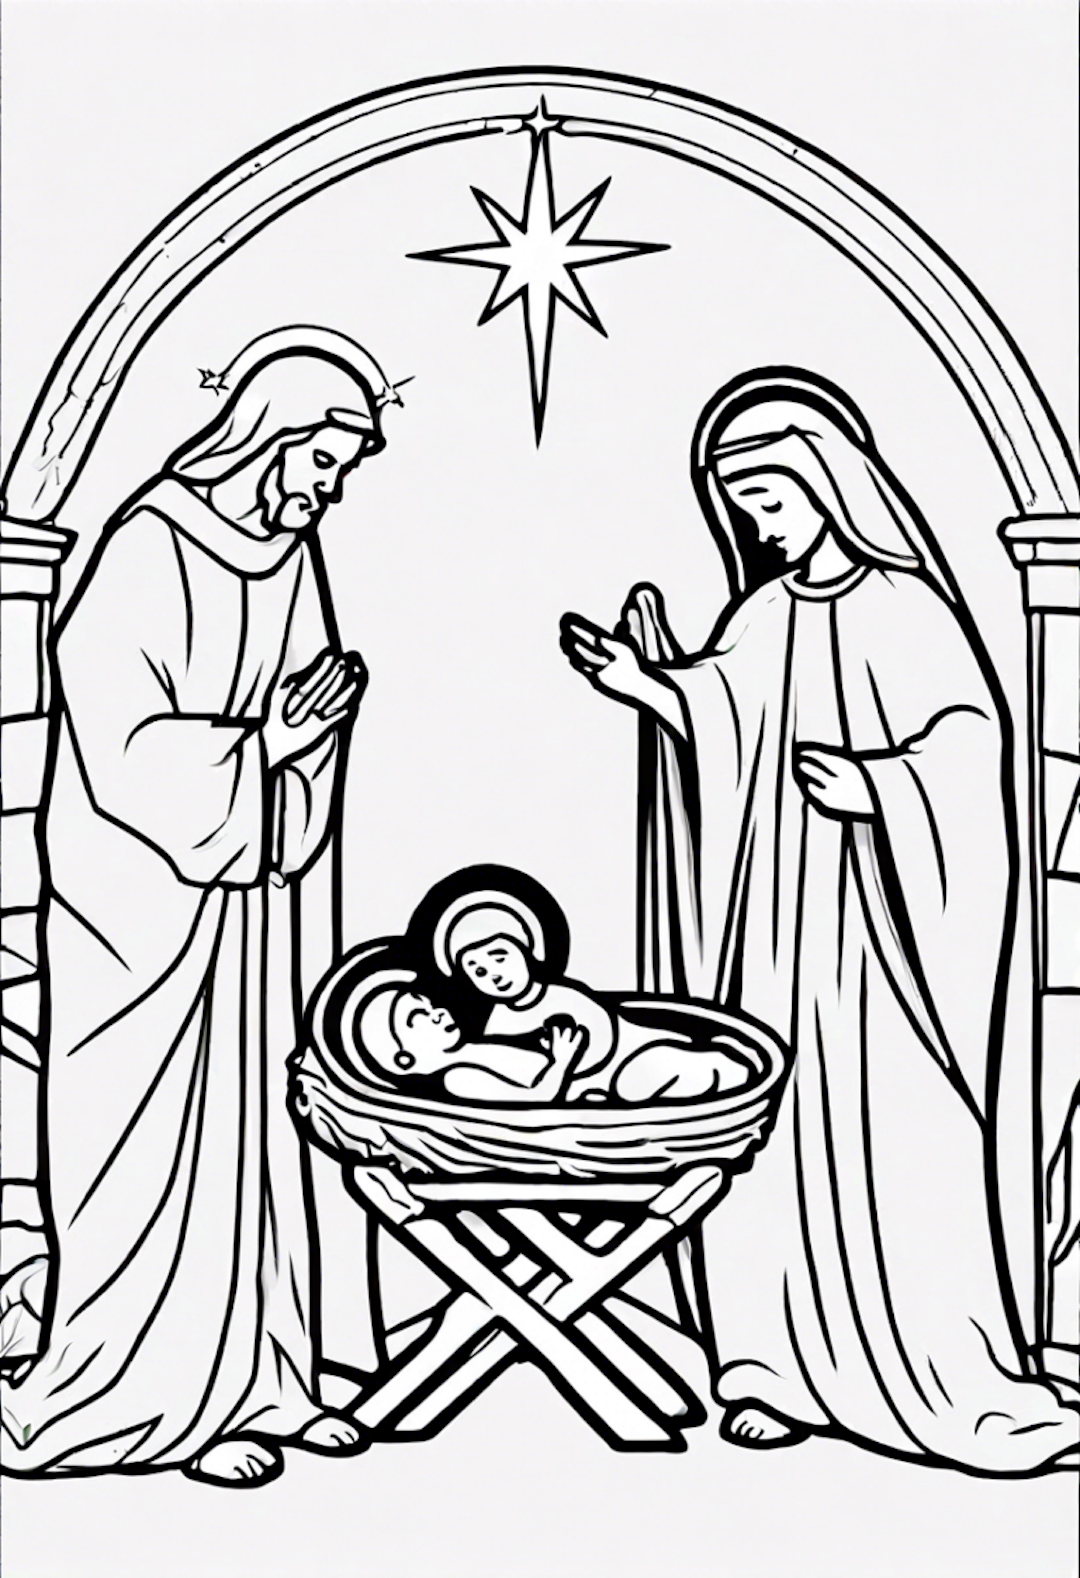 Nativity Scene with Baby Jesus Coloring Page coloring pages